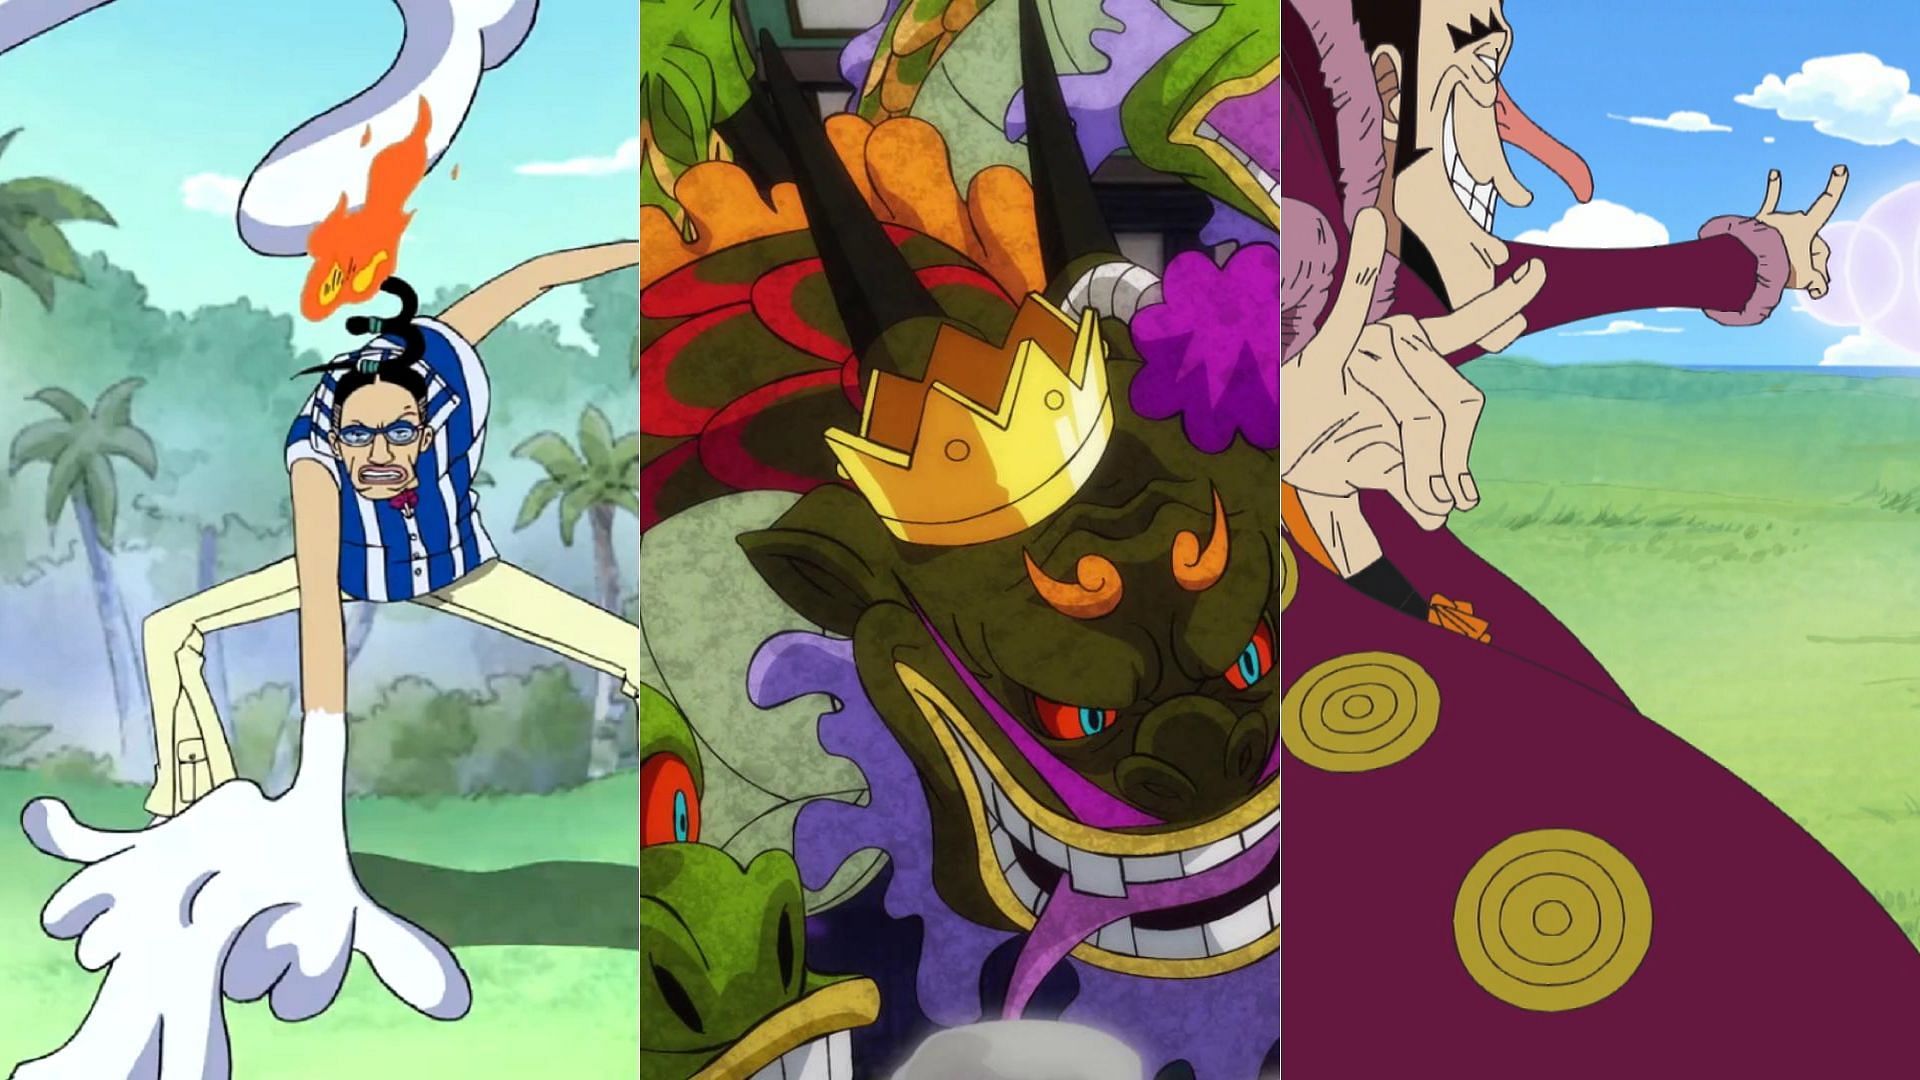 10 Devil Fruits We Might See in One Piece Season 2